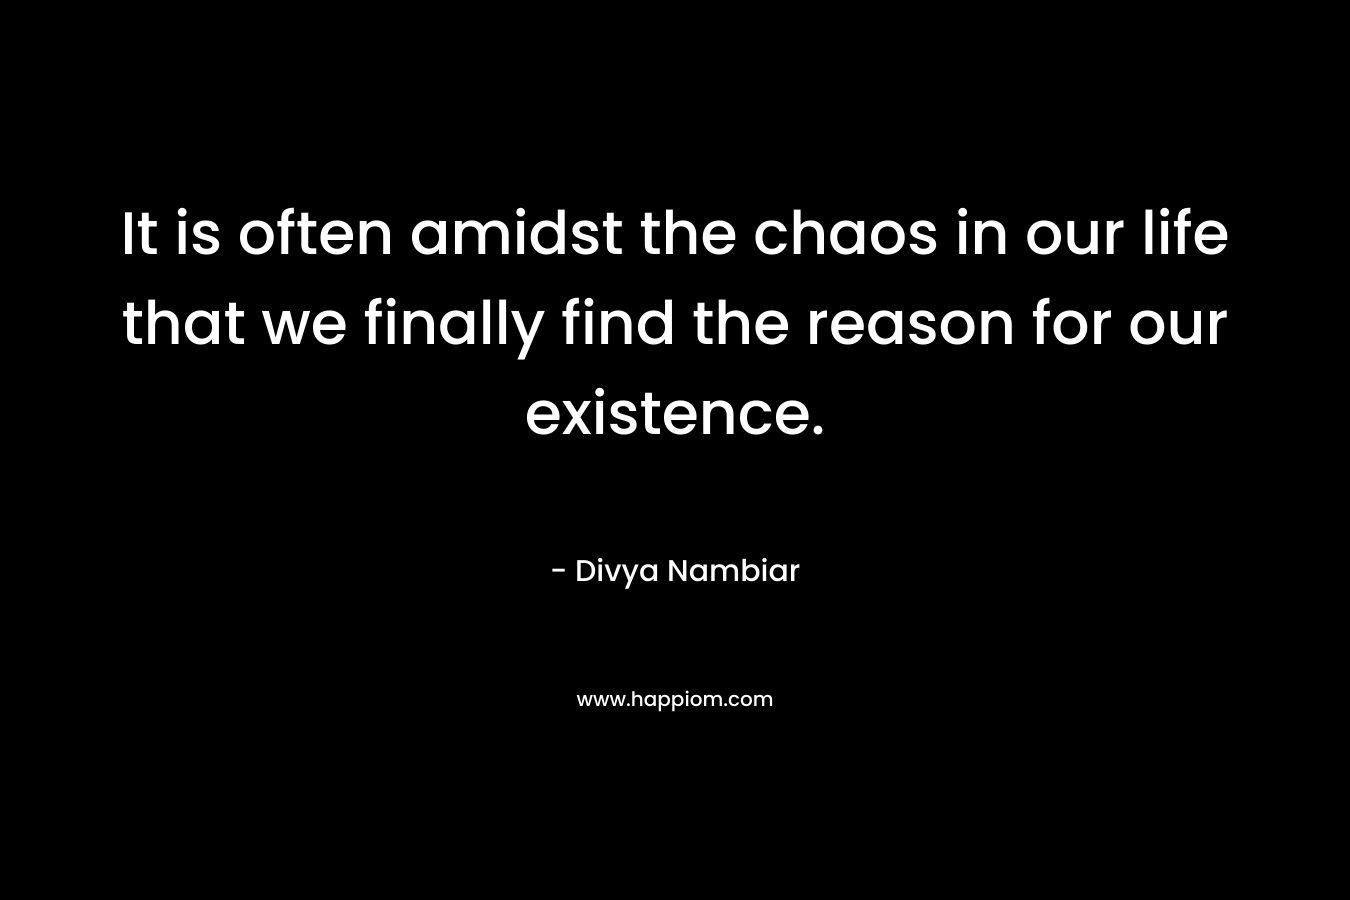 It is often amidst the chaos in our life that we finally find the reason for our existence. – Divya Nambiar